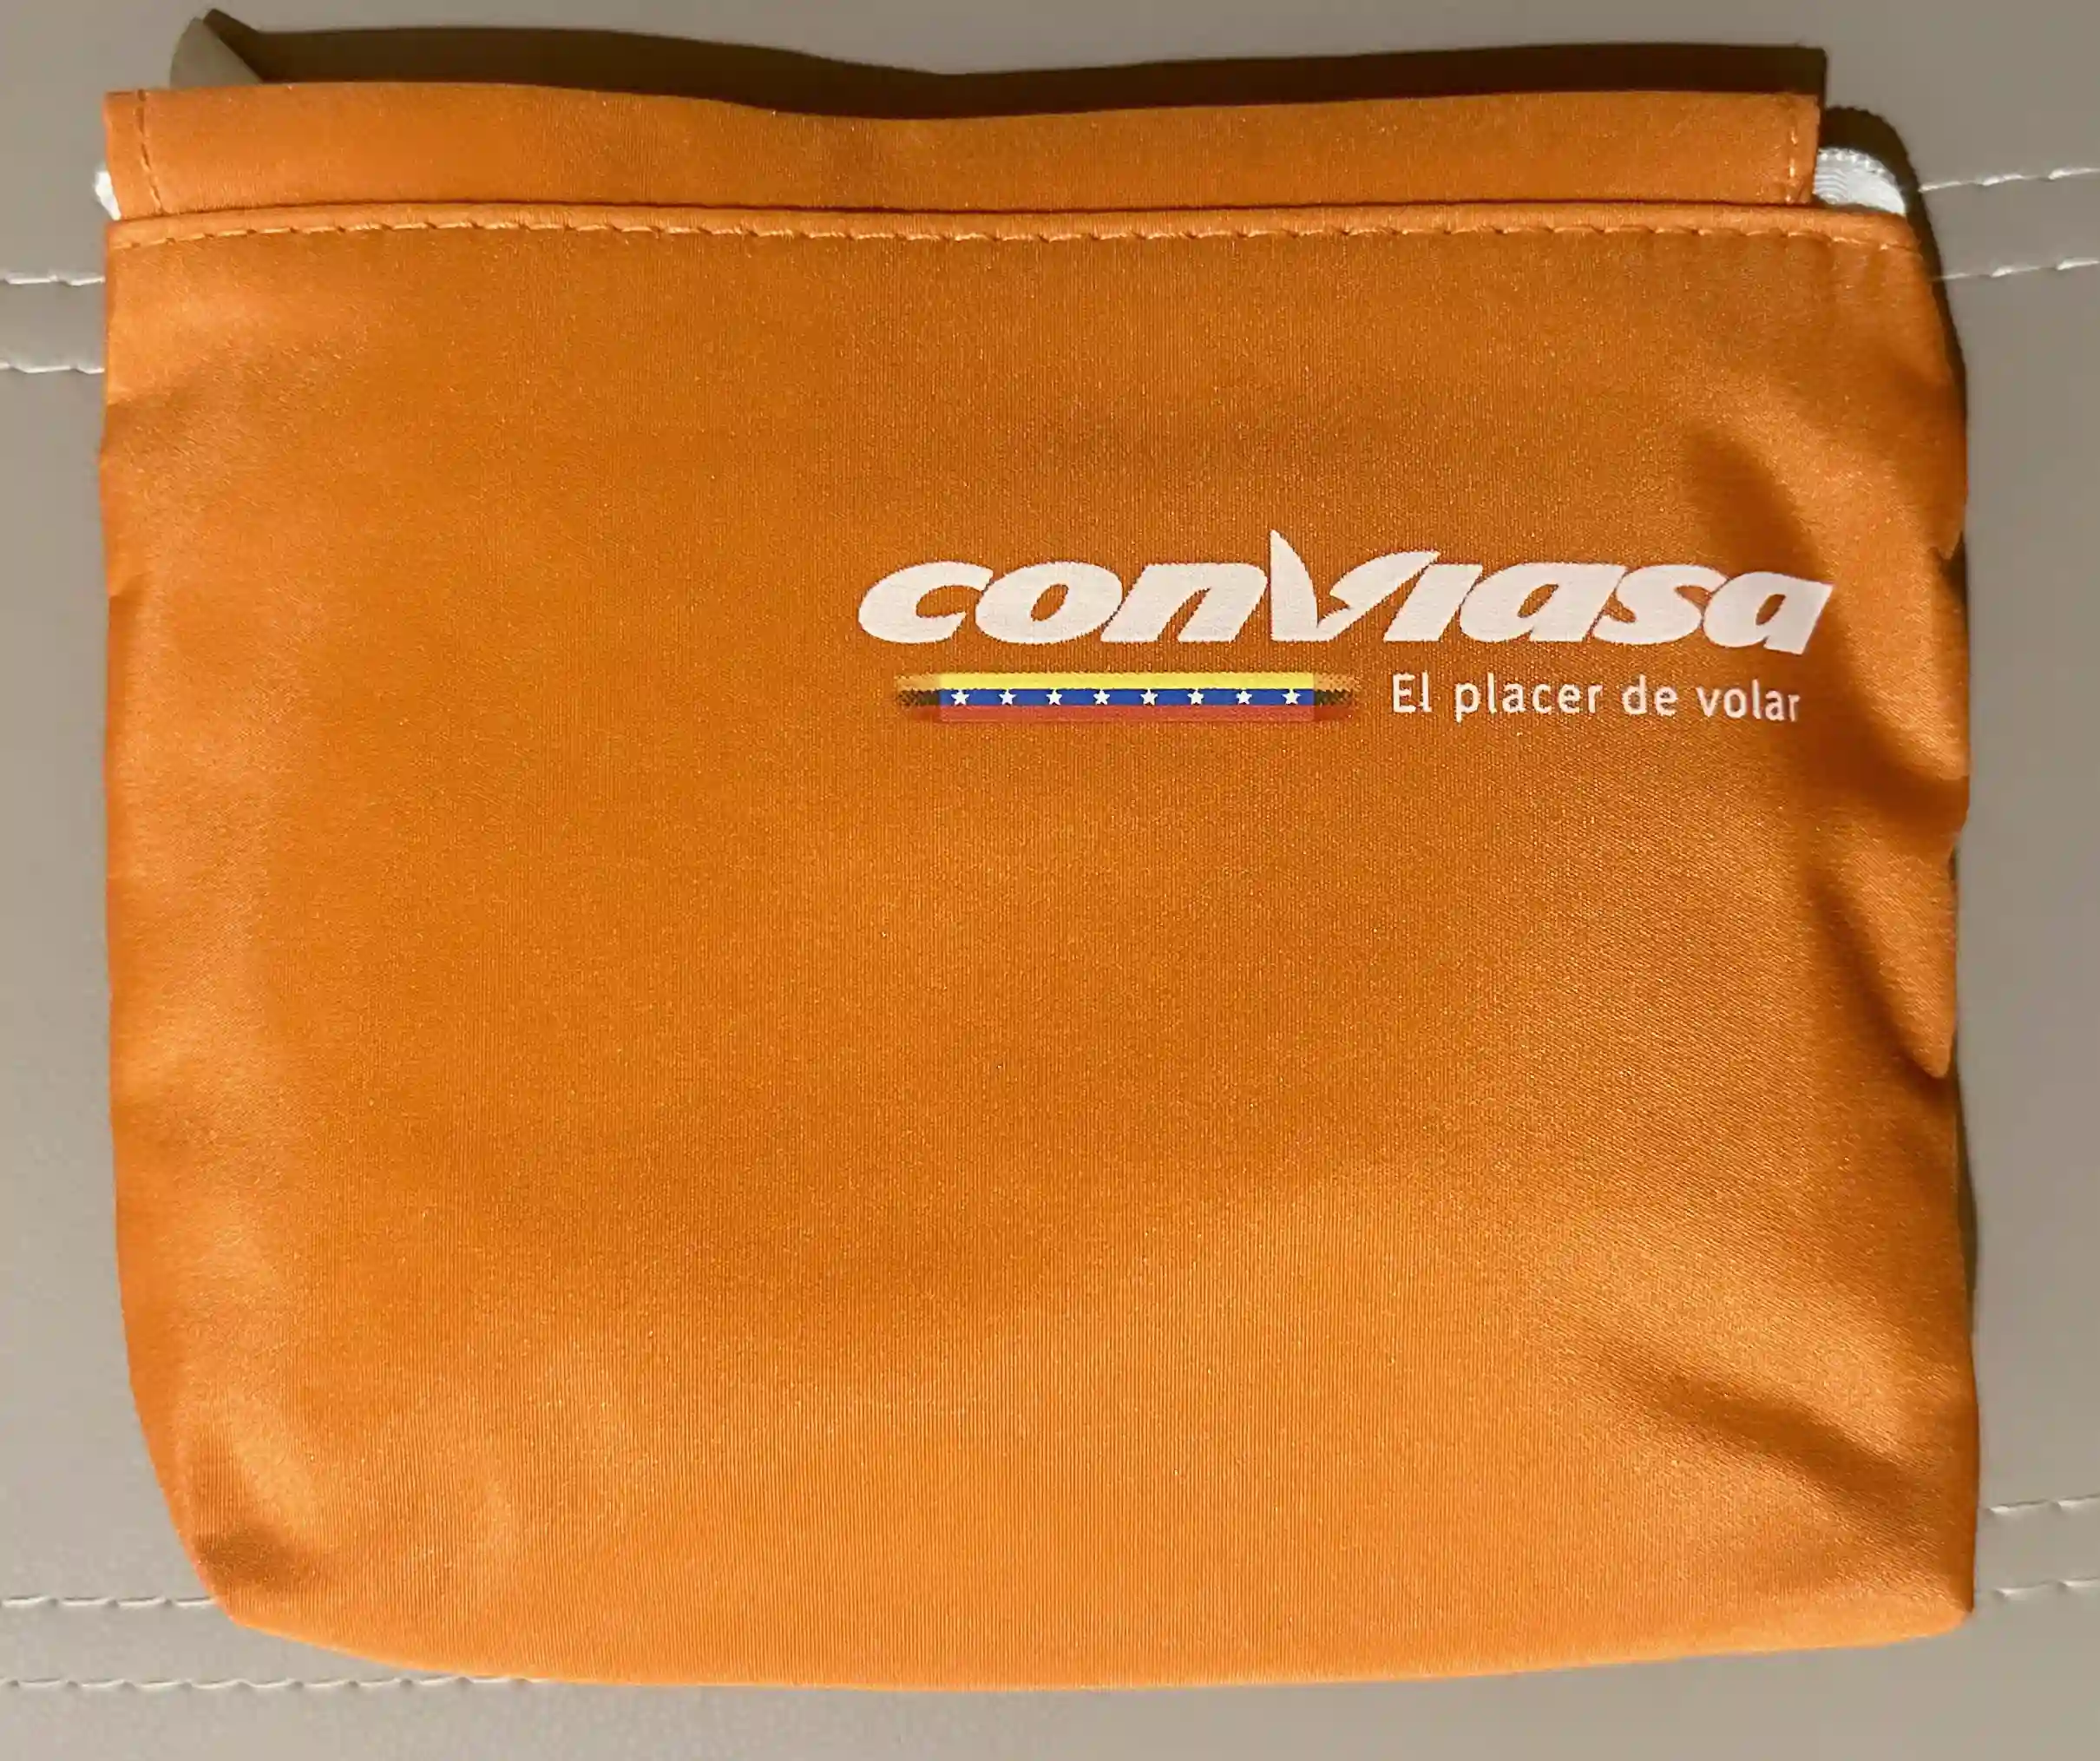 an orange pouch with a logo on it